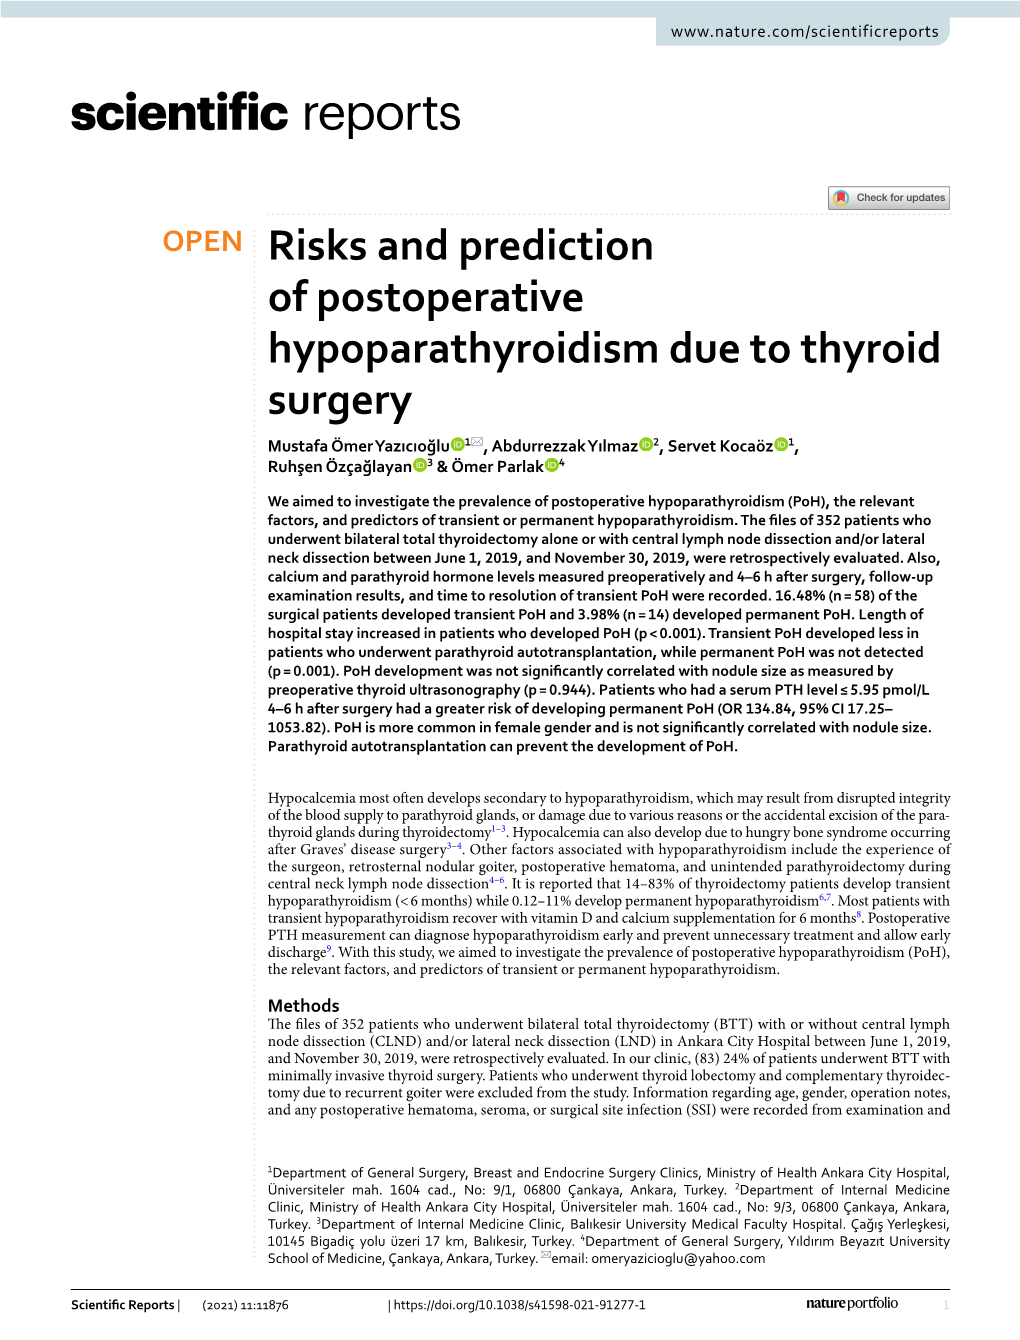 Risks and Prediction of Postoperative Hypoparathyroidism Due to Thyroid